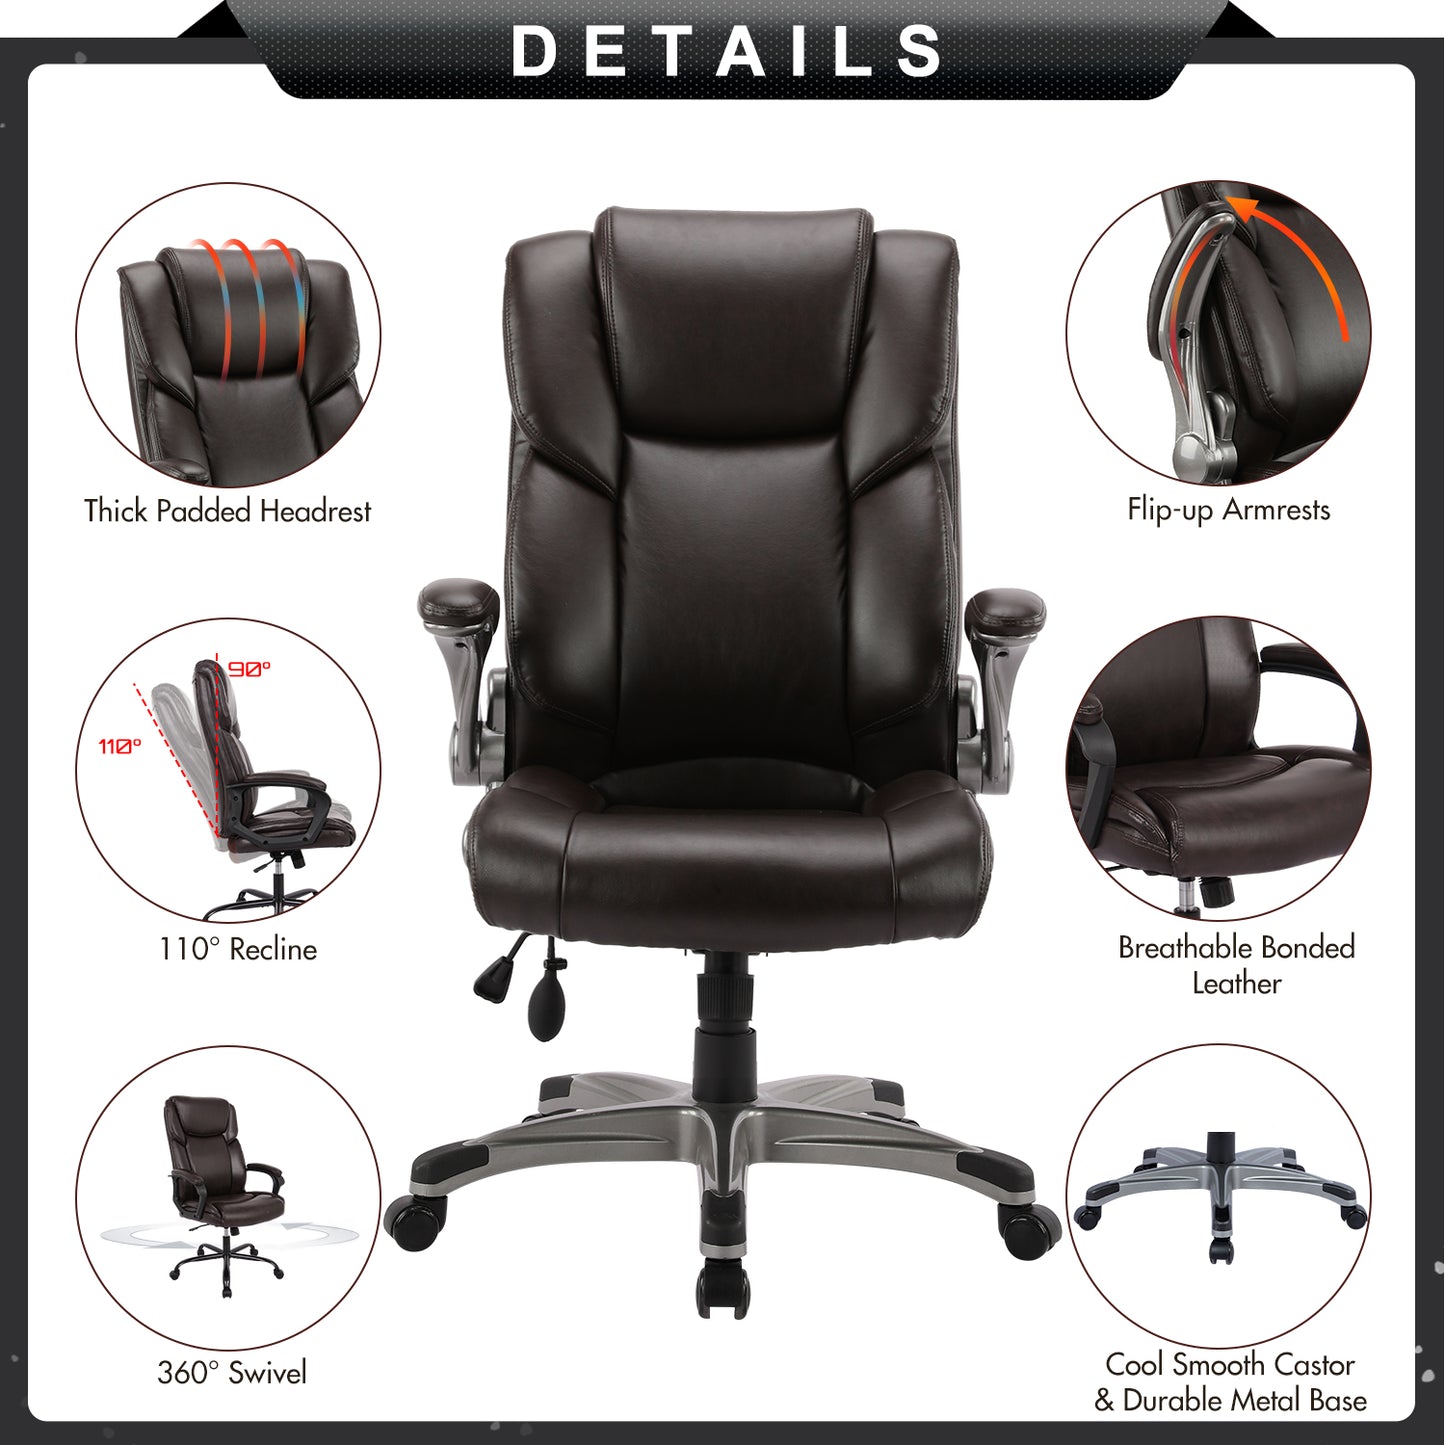 COLAMY Ergonomic Office Chair 300lbs Computer Chair W Inflatable Lumbar Support Model.2822